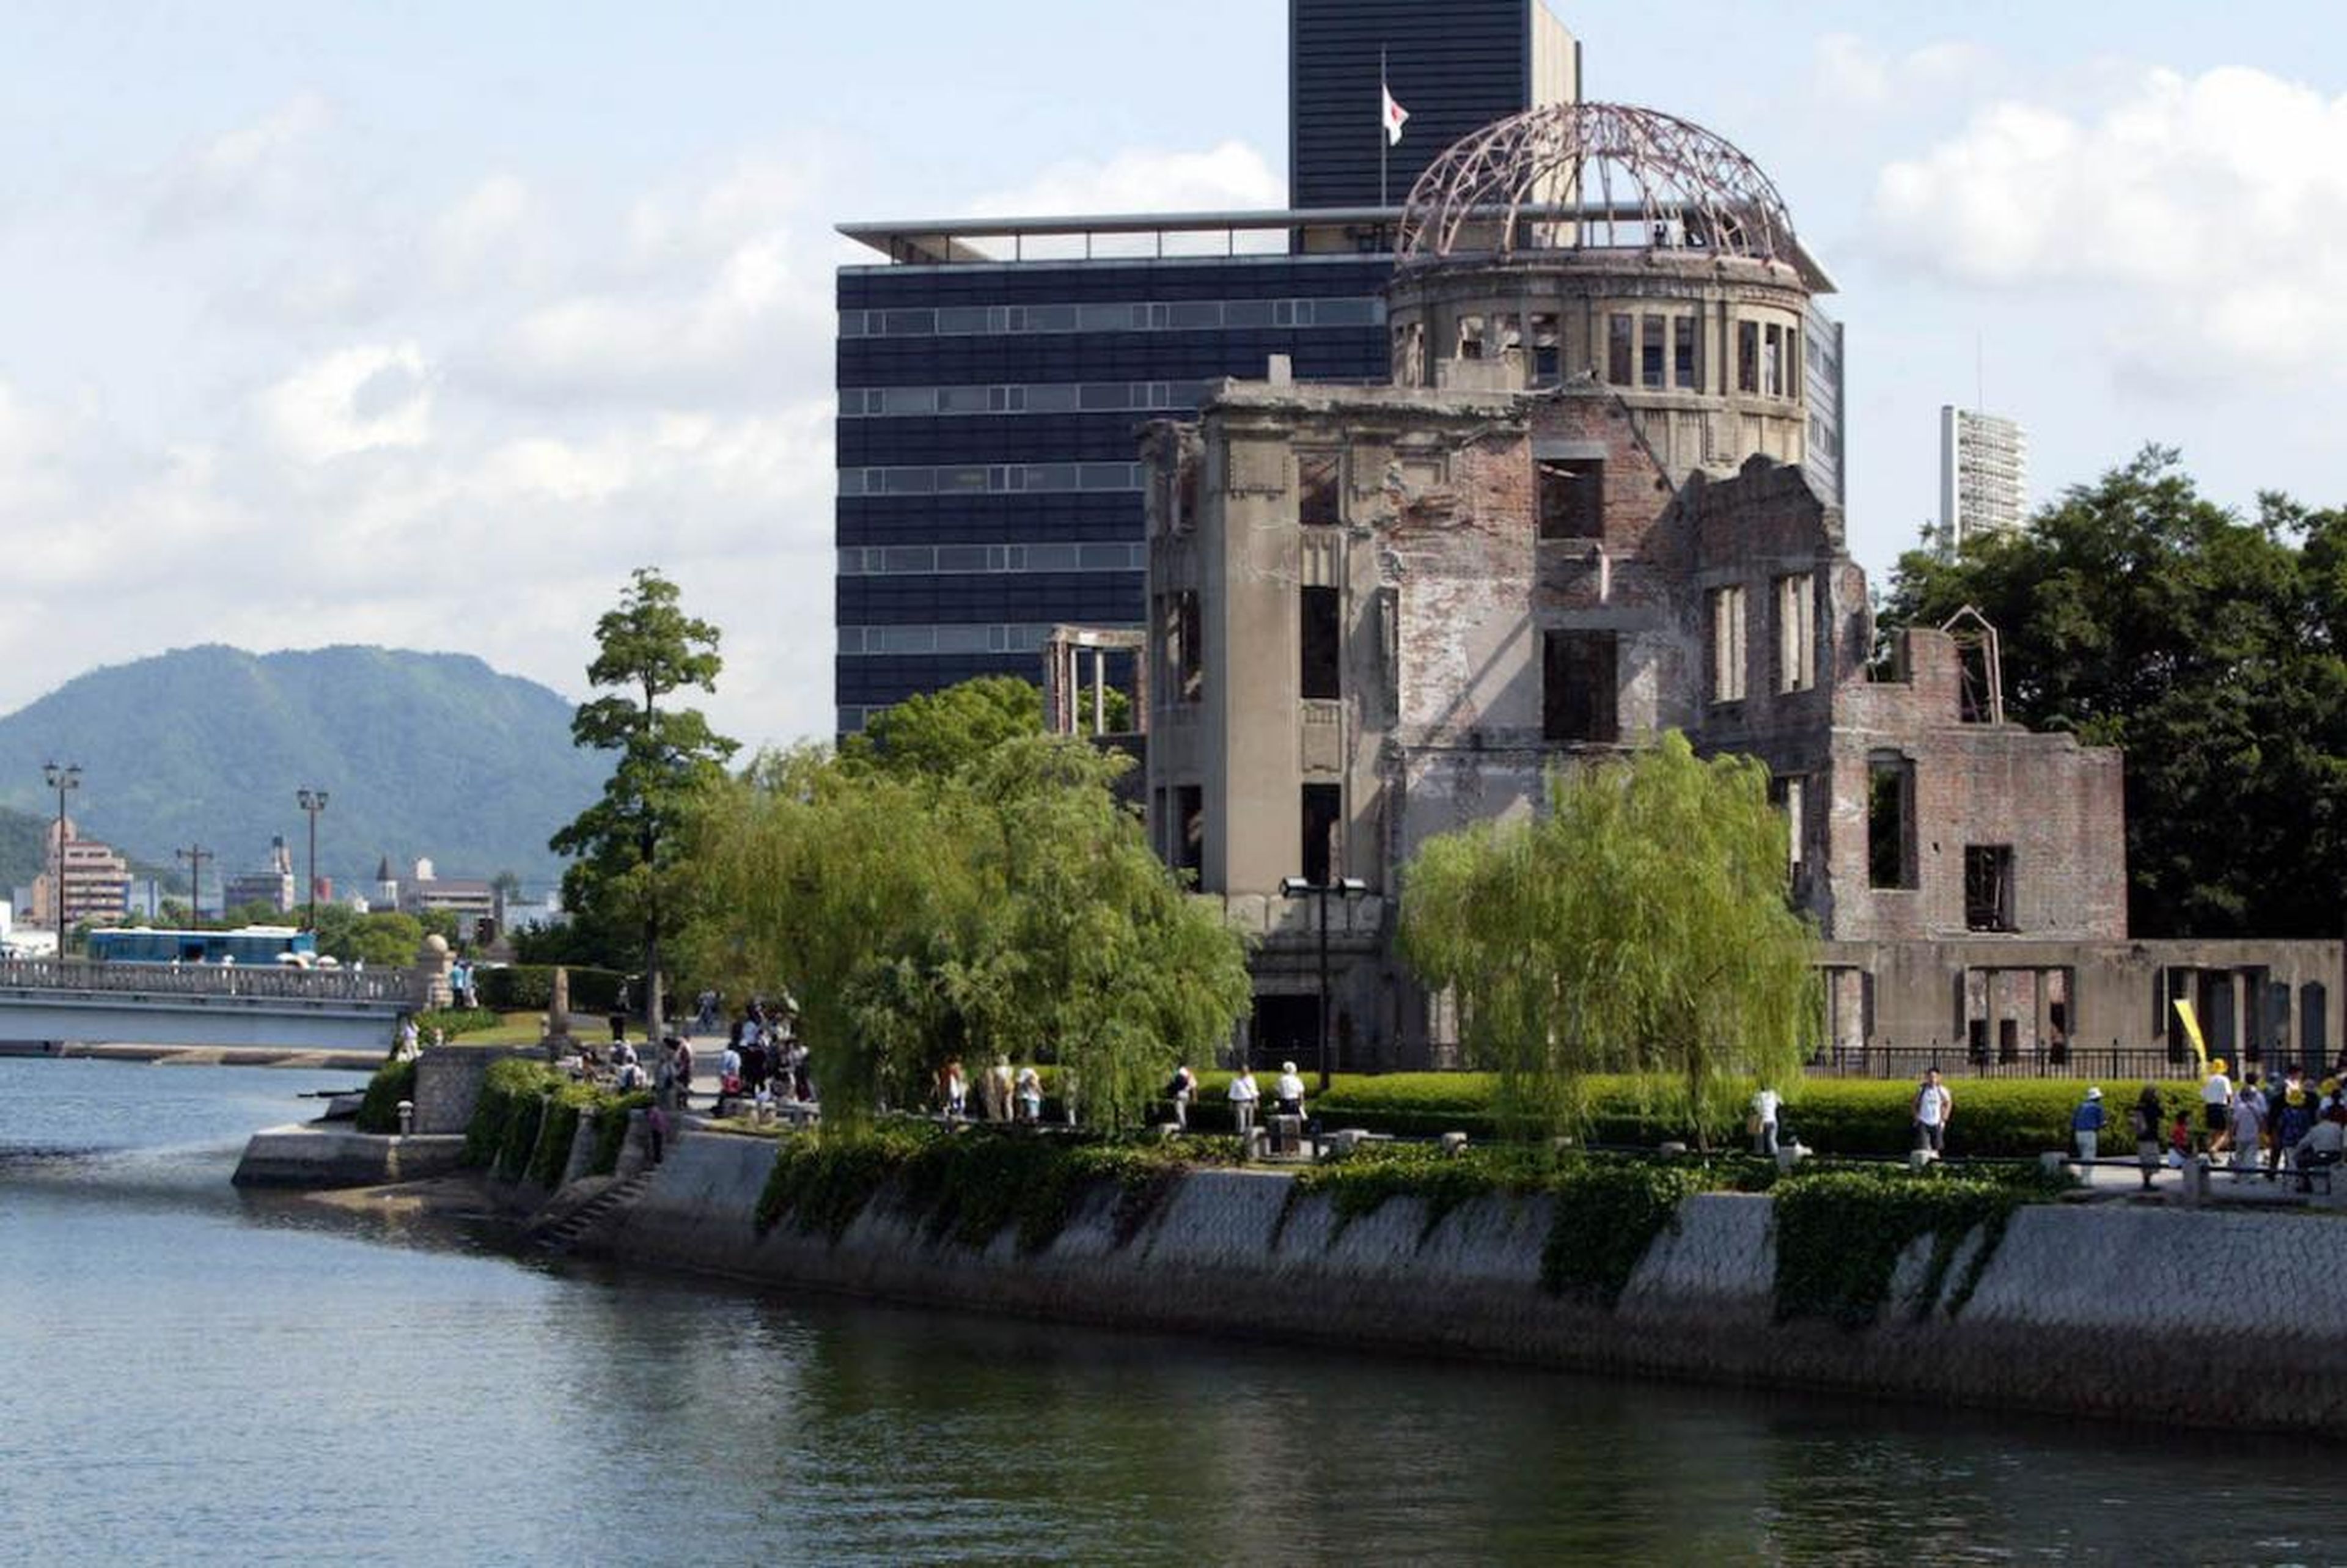 The A-bomb Dome, which survived the 1945 atomic bombing on Hiroshima.